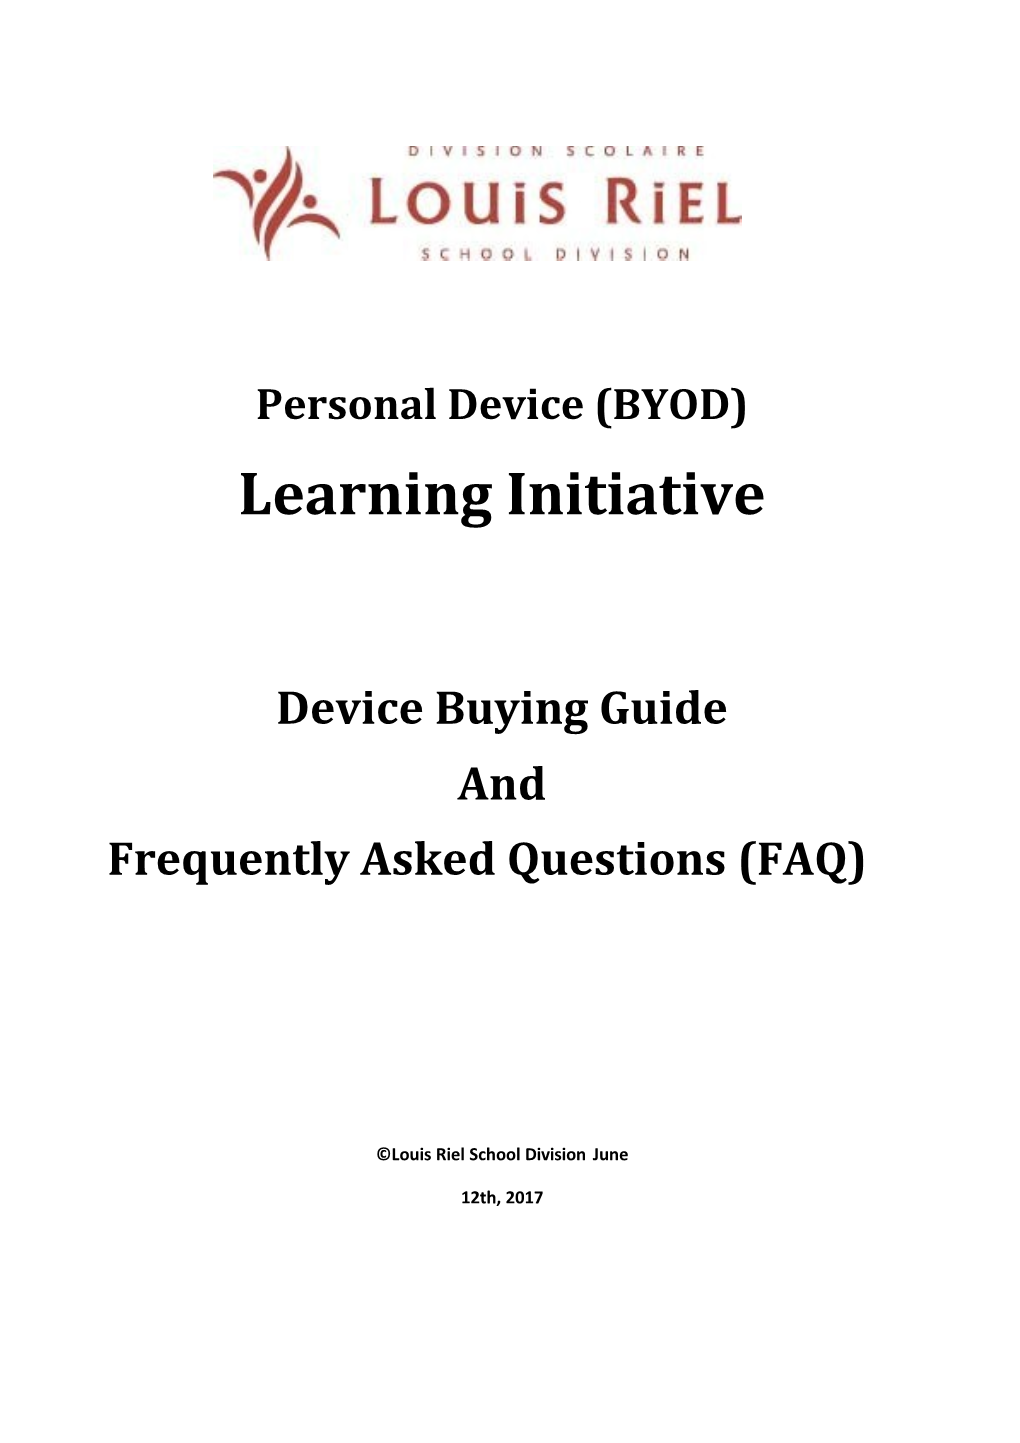 Personal Device (BYOD) Learning Initiative